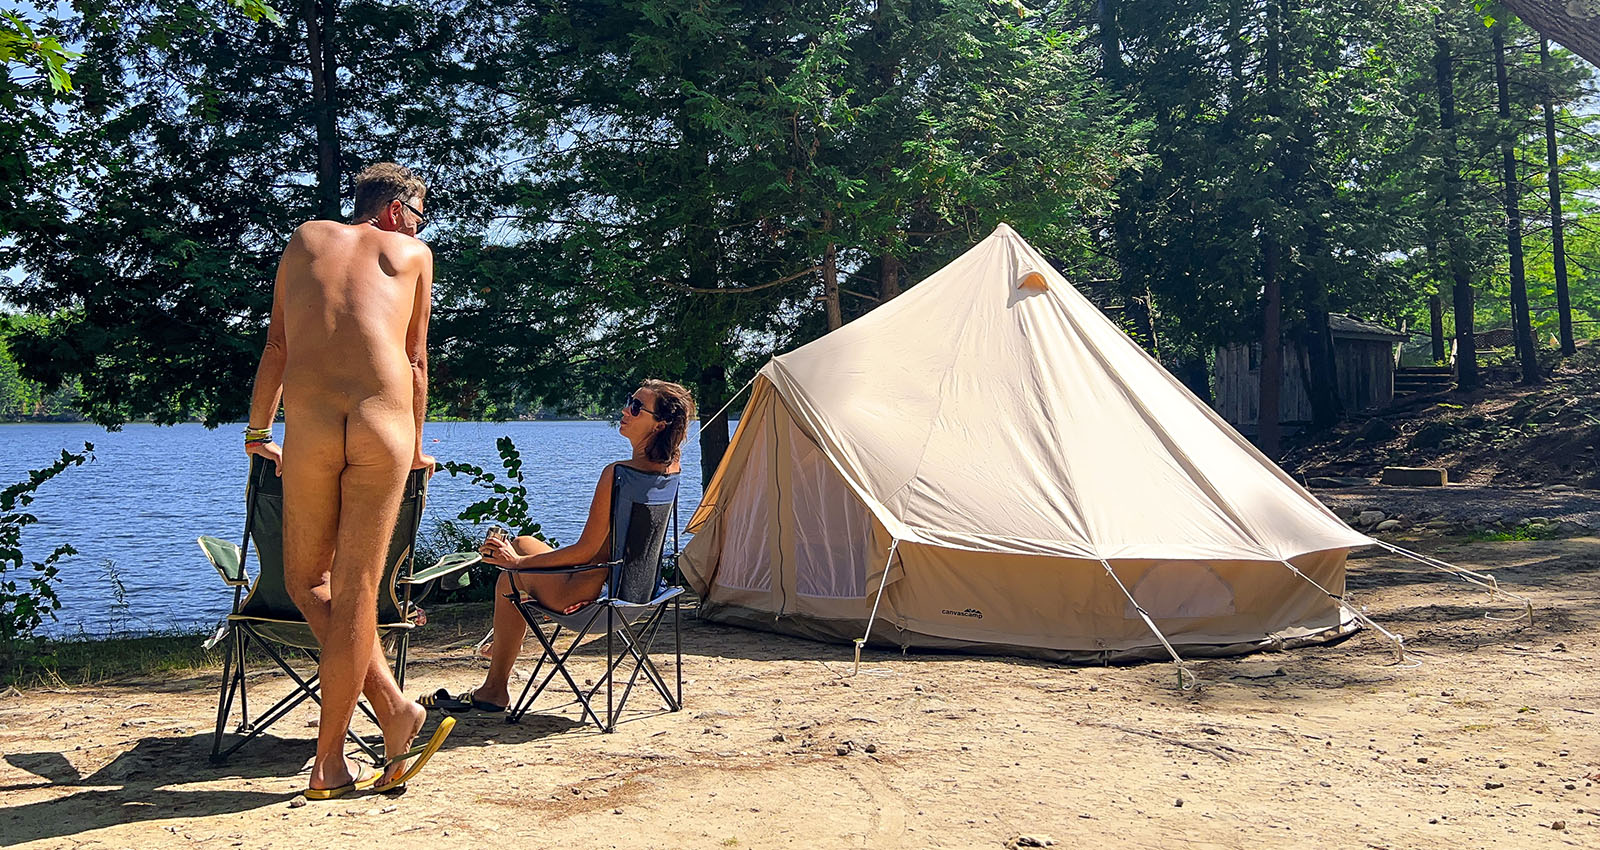 Nude in a tent